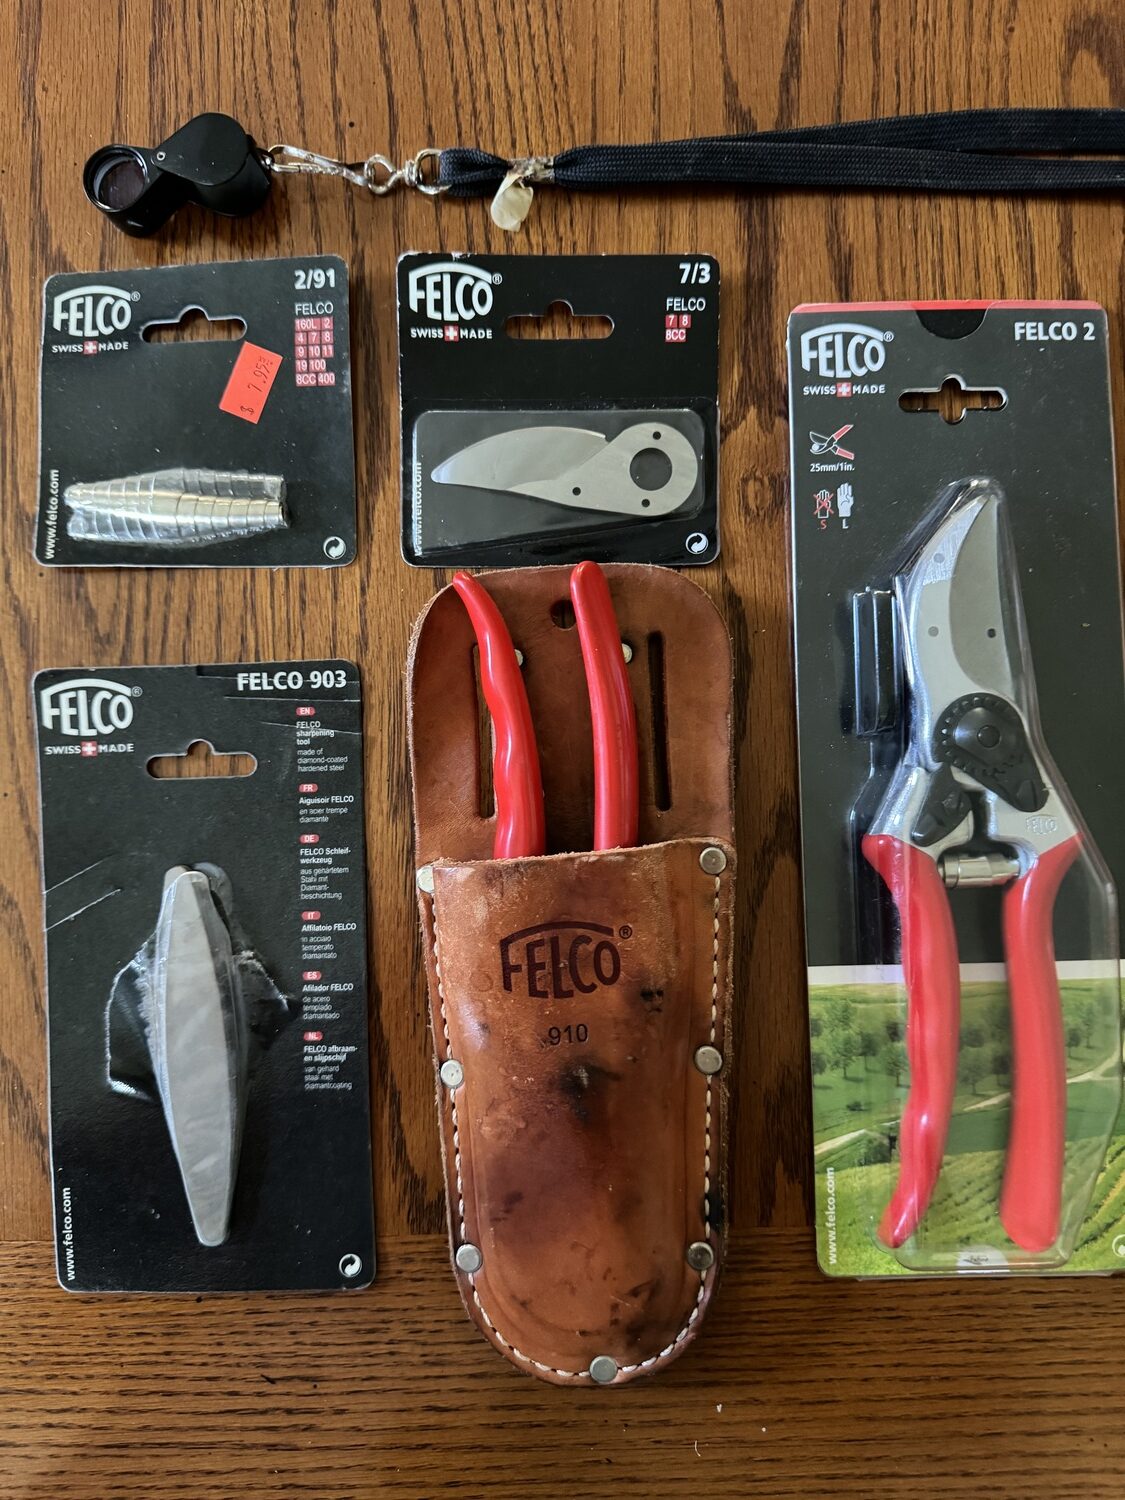 The classic and sturdy Felco #2 (right). Then to the left is the #910 holster that attaches to a belt. Also pictured are the accessories to keep the #2 in great shape from a sharpening stone to a spring and replacement blade. The entire 